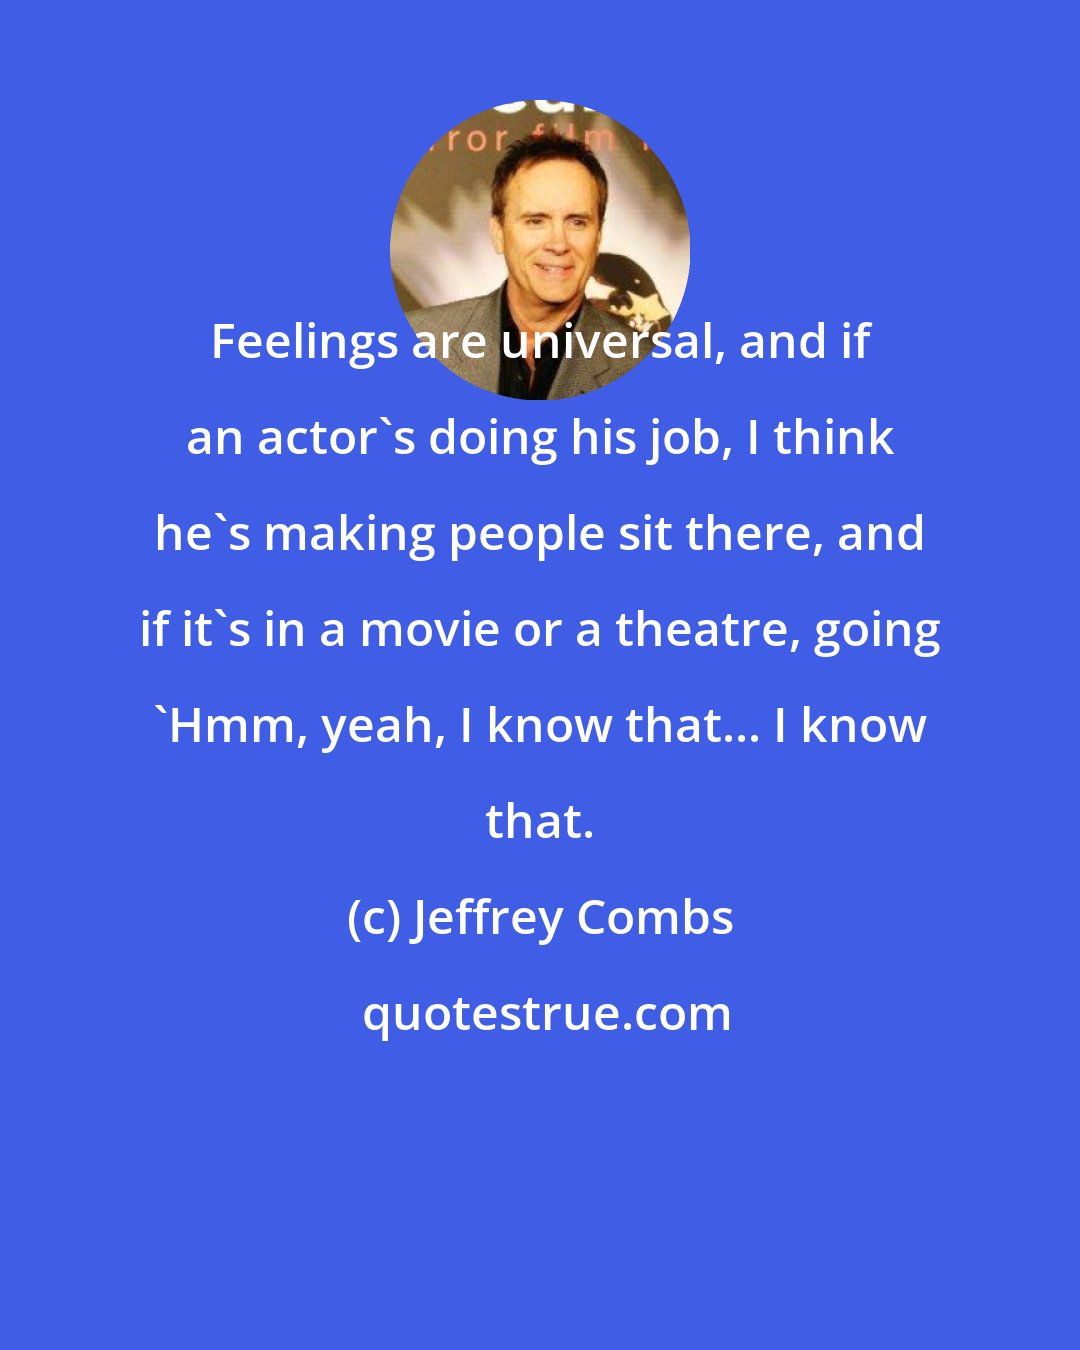 Jeffrey Combs: Feelings are universal, and if an actor's doing his job, I think he's making people sit there, and if it's in a movie or a theatre, going 'Hmm, yeah, I know that... I know that.